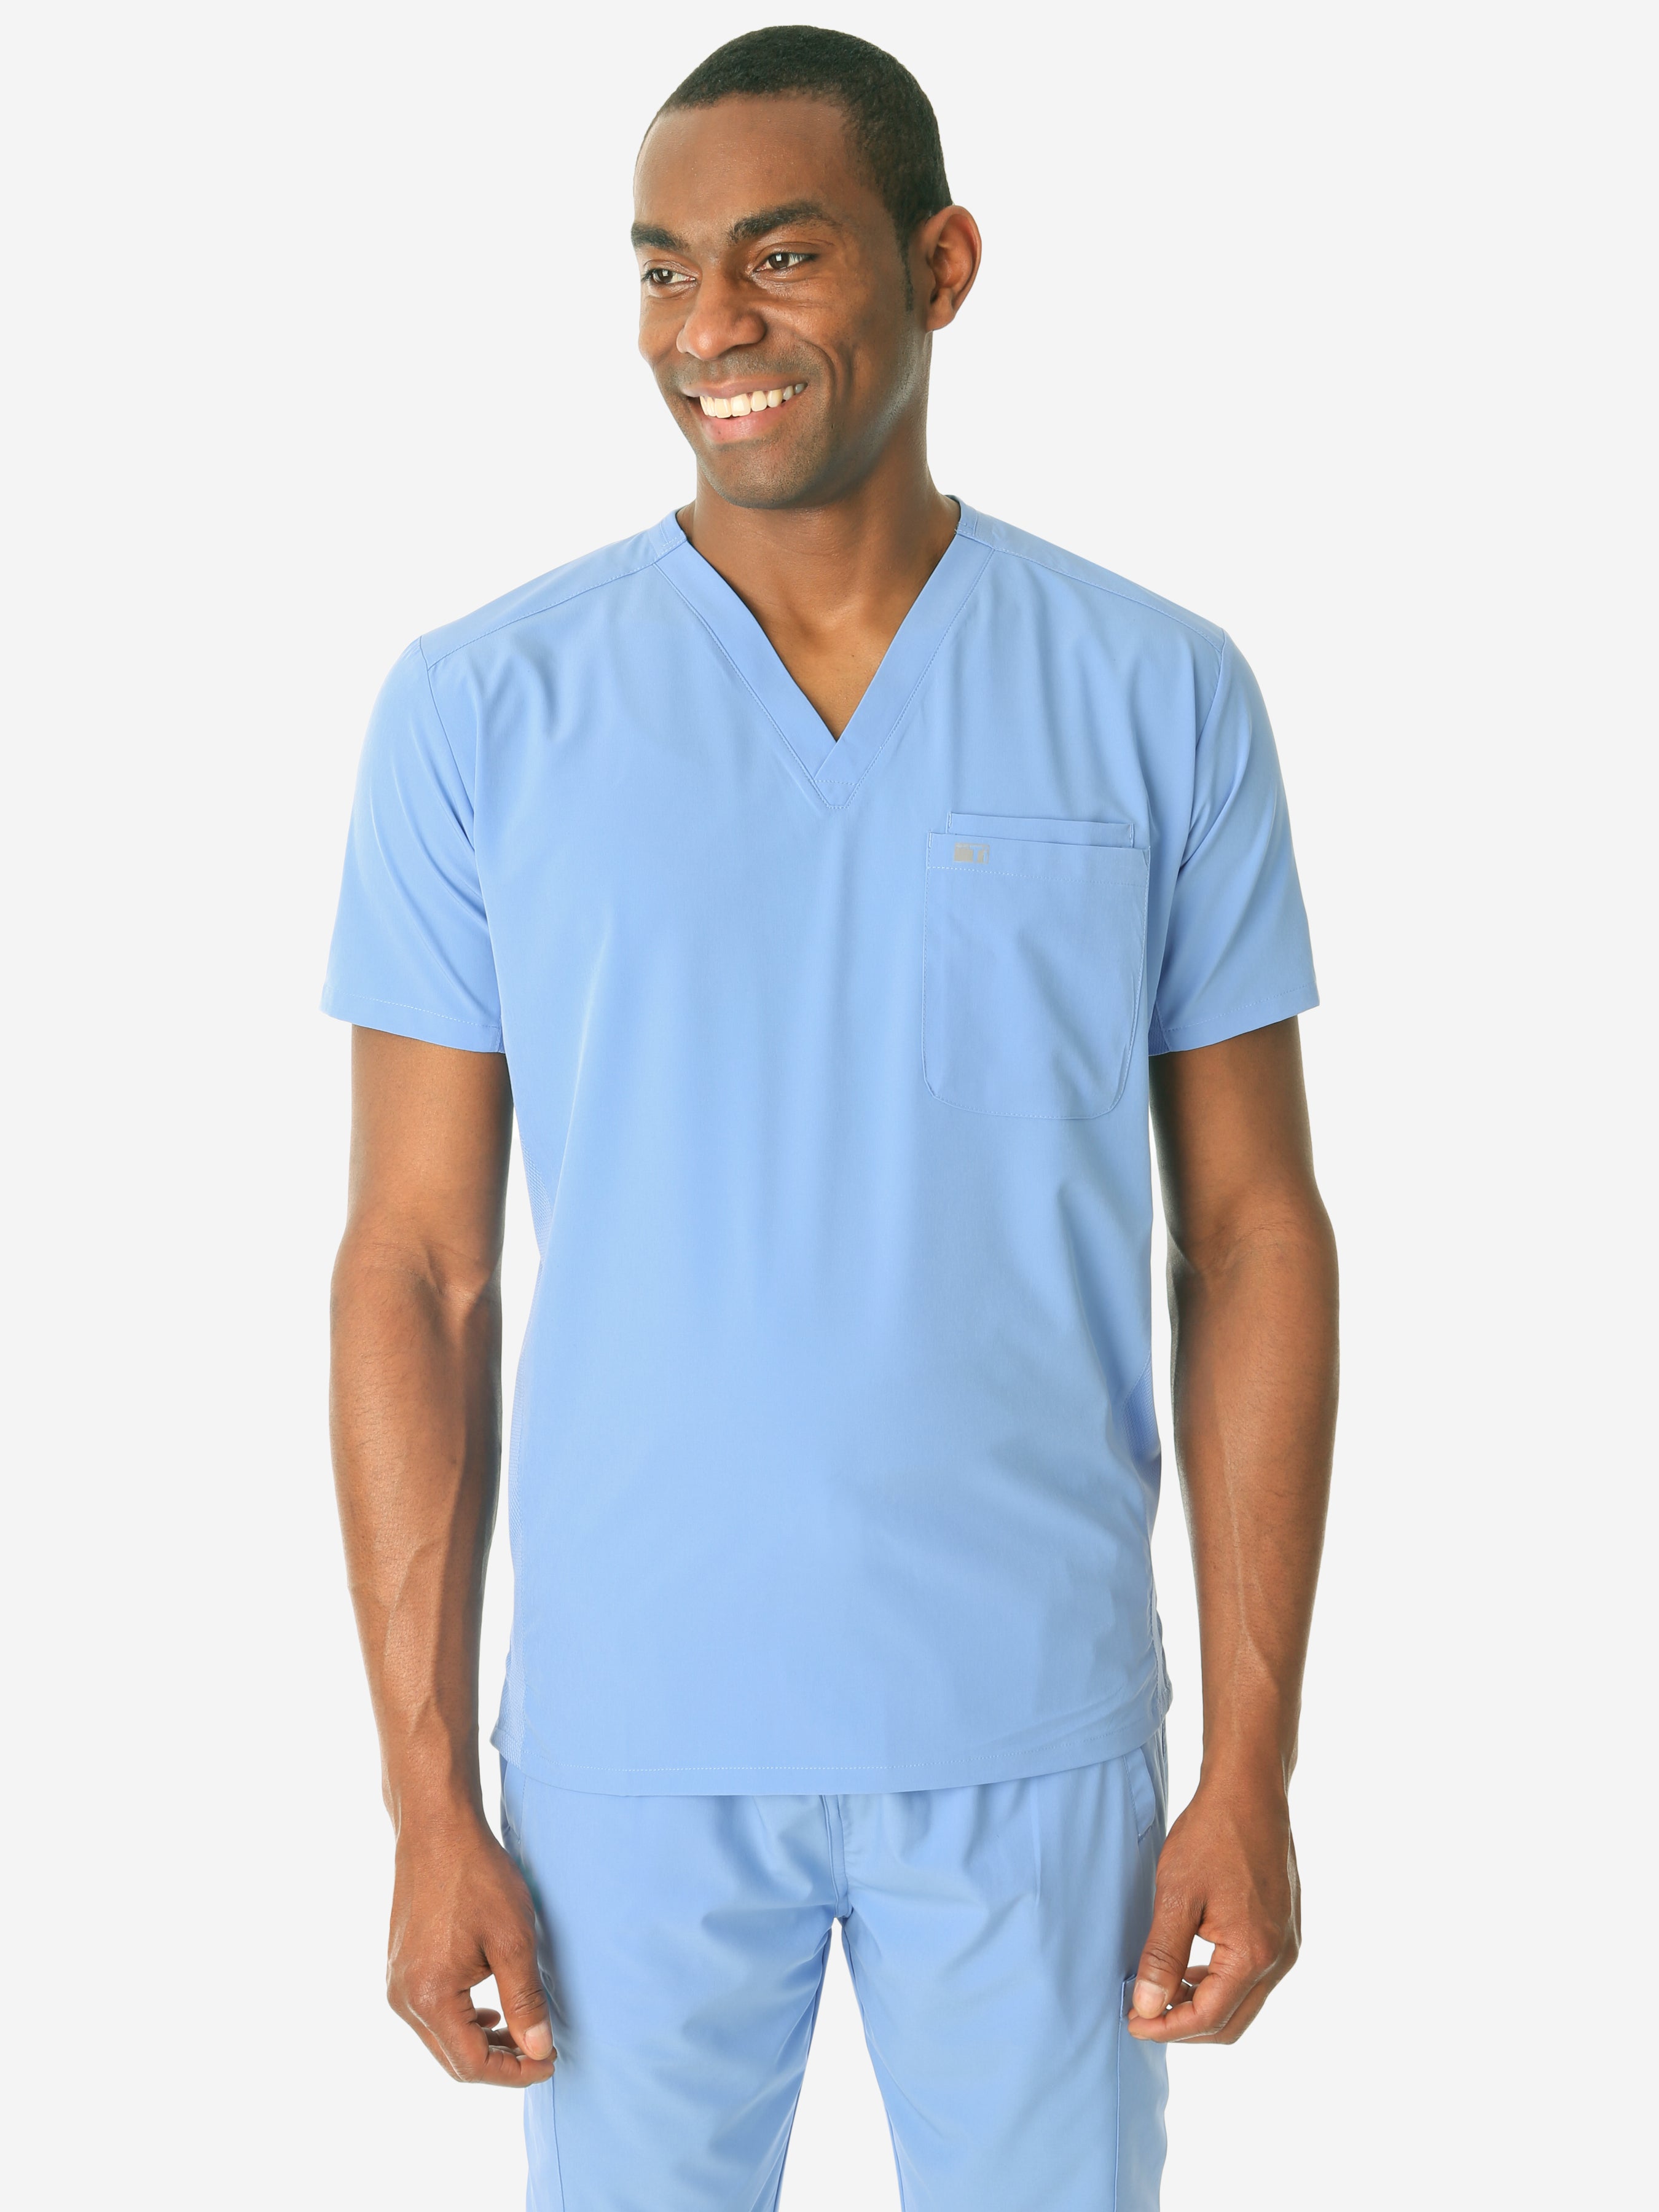 3 of The Most Comfortable Blue Sky Scrub Tops for Men - Blue Sky Scrubs